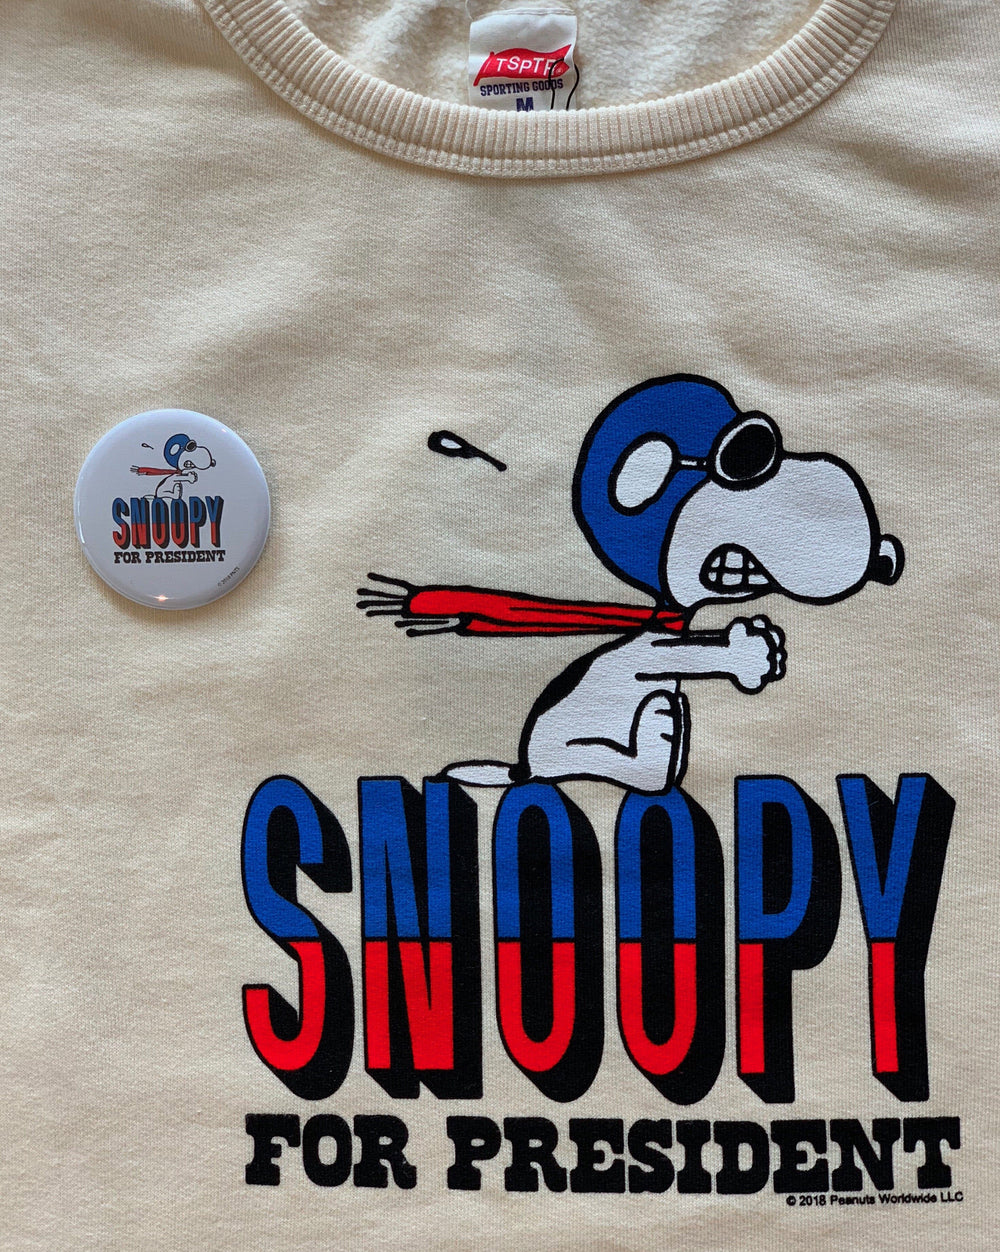 TSPTR Snoopy For President Sweatshirt. White shirt with a red white and blue design of Snoopy For President. 